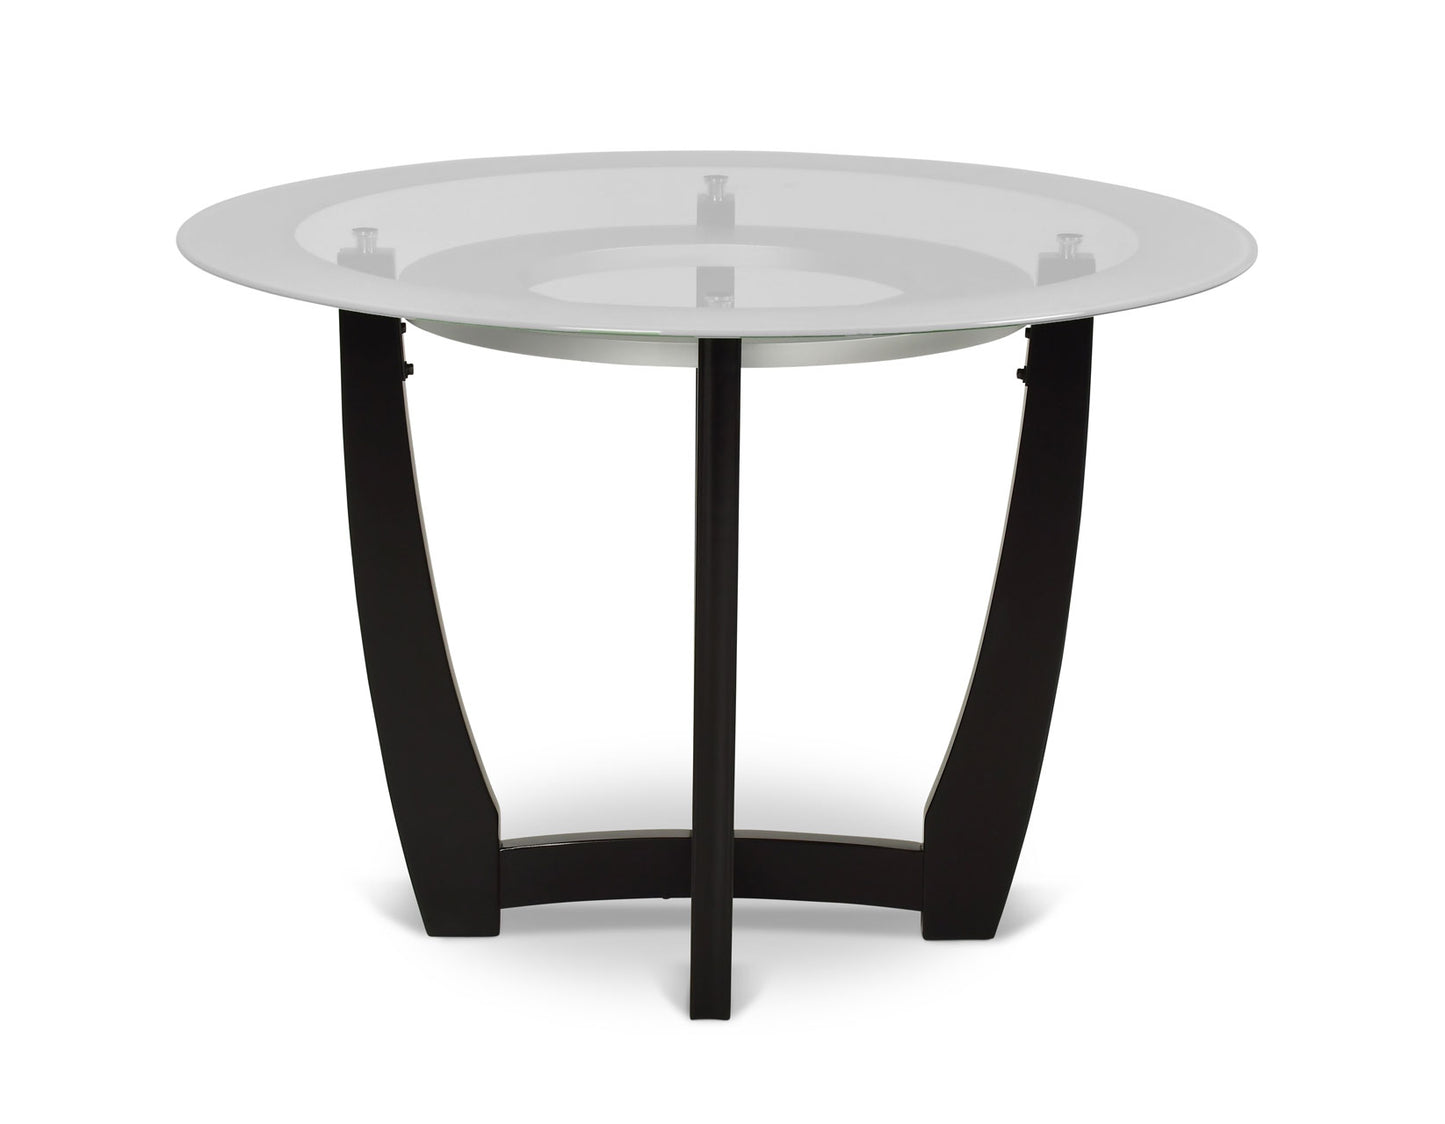 Verano 5 Piece Set
(Glass Top Table & 4 Black Side Chairs)